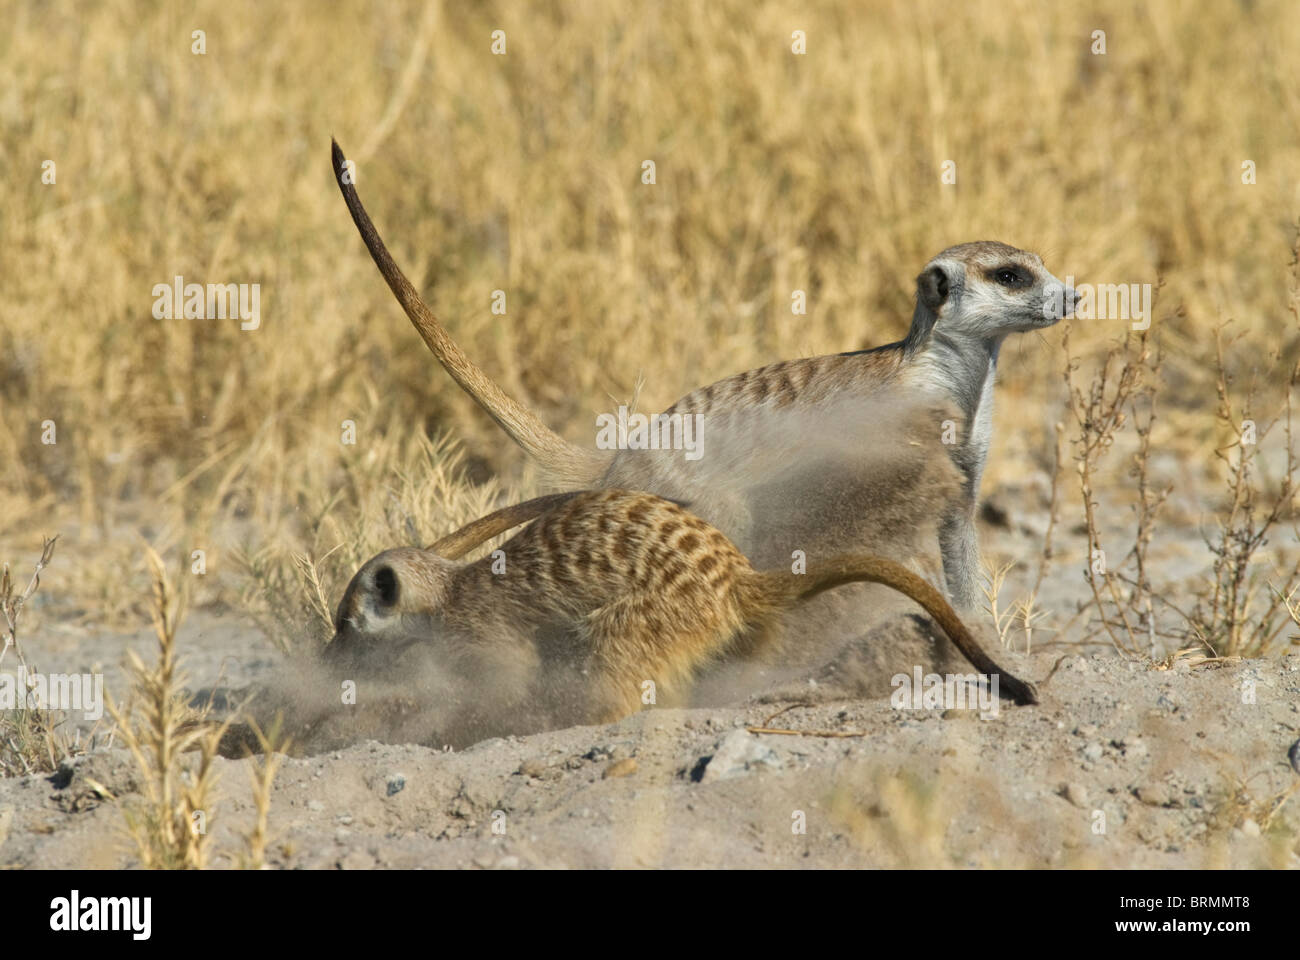 Suricate or meerkat frantically digging a hole Stock Photo